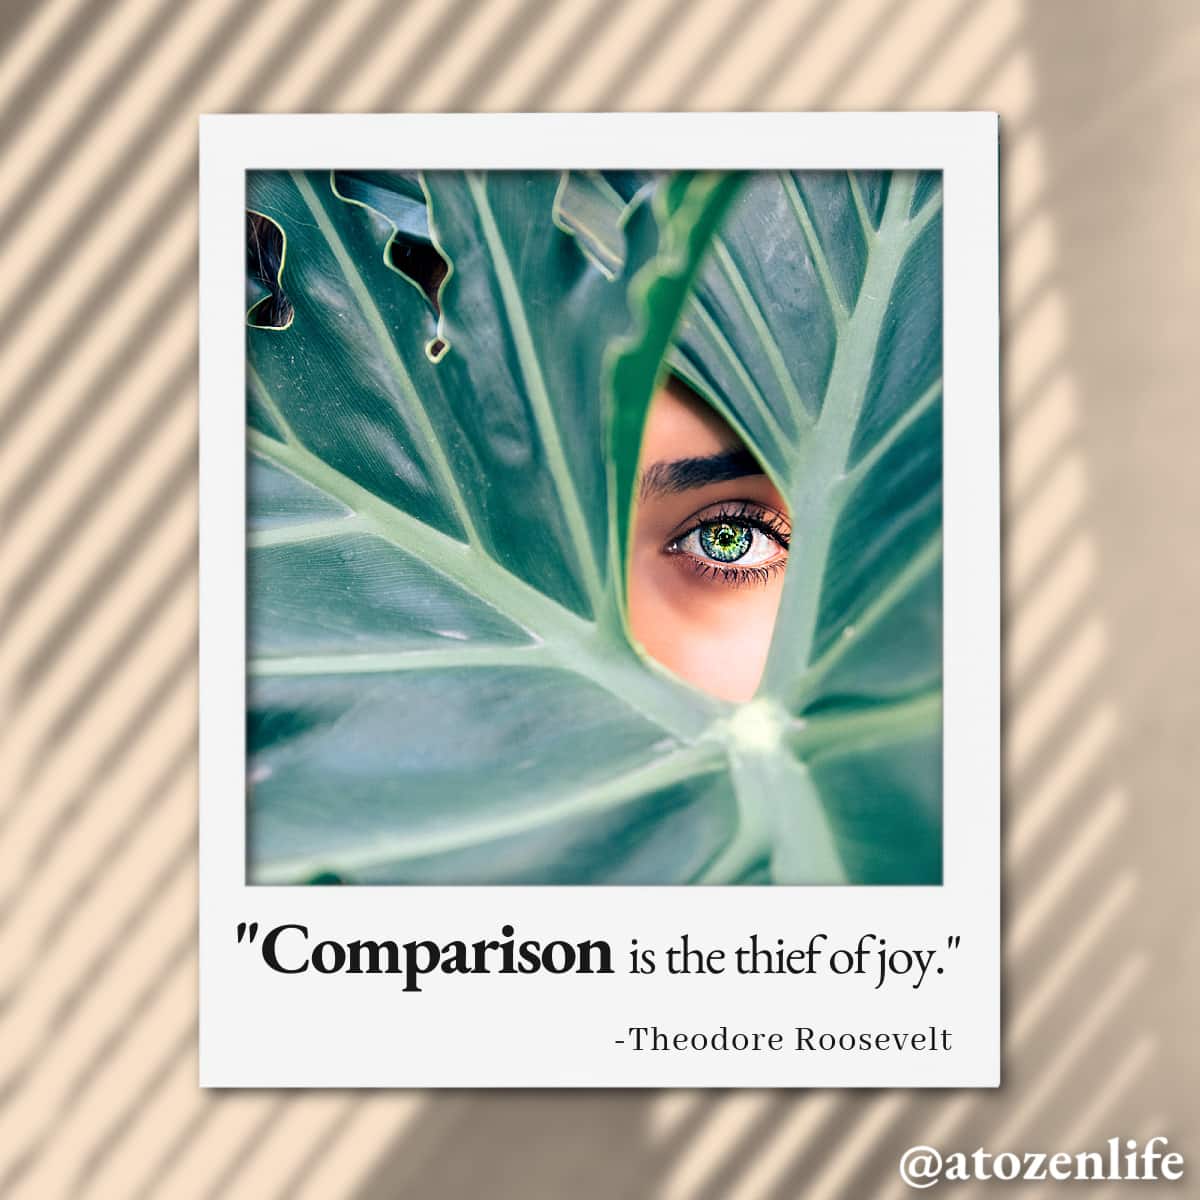 Instagram picture for Theodore Roosevelt quote: Comparison is the thief of joy."